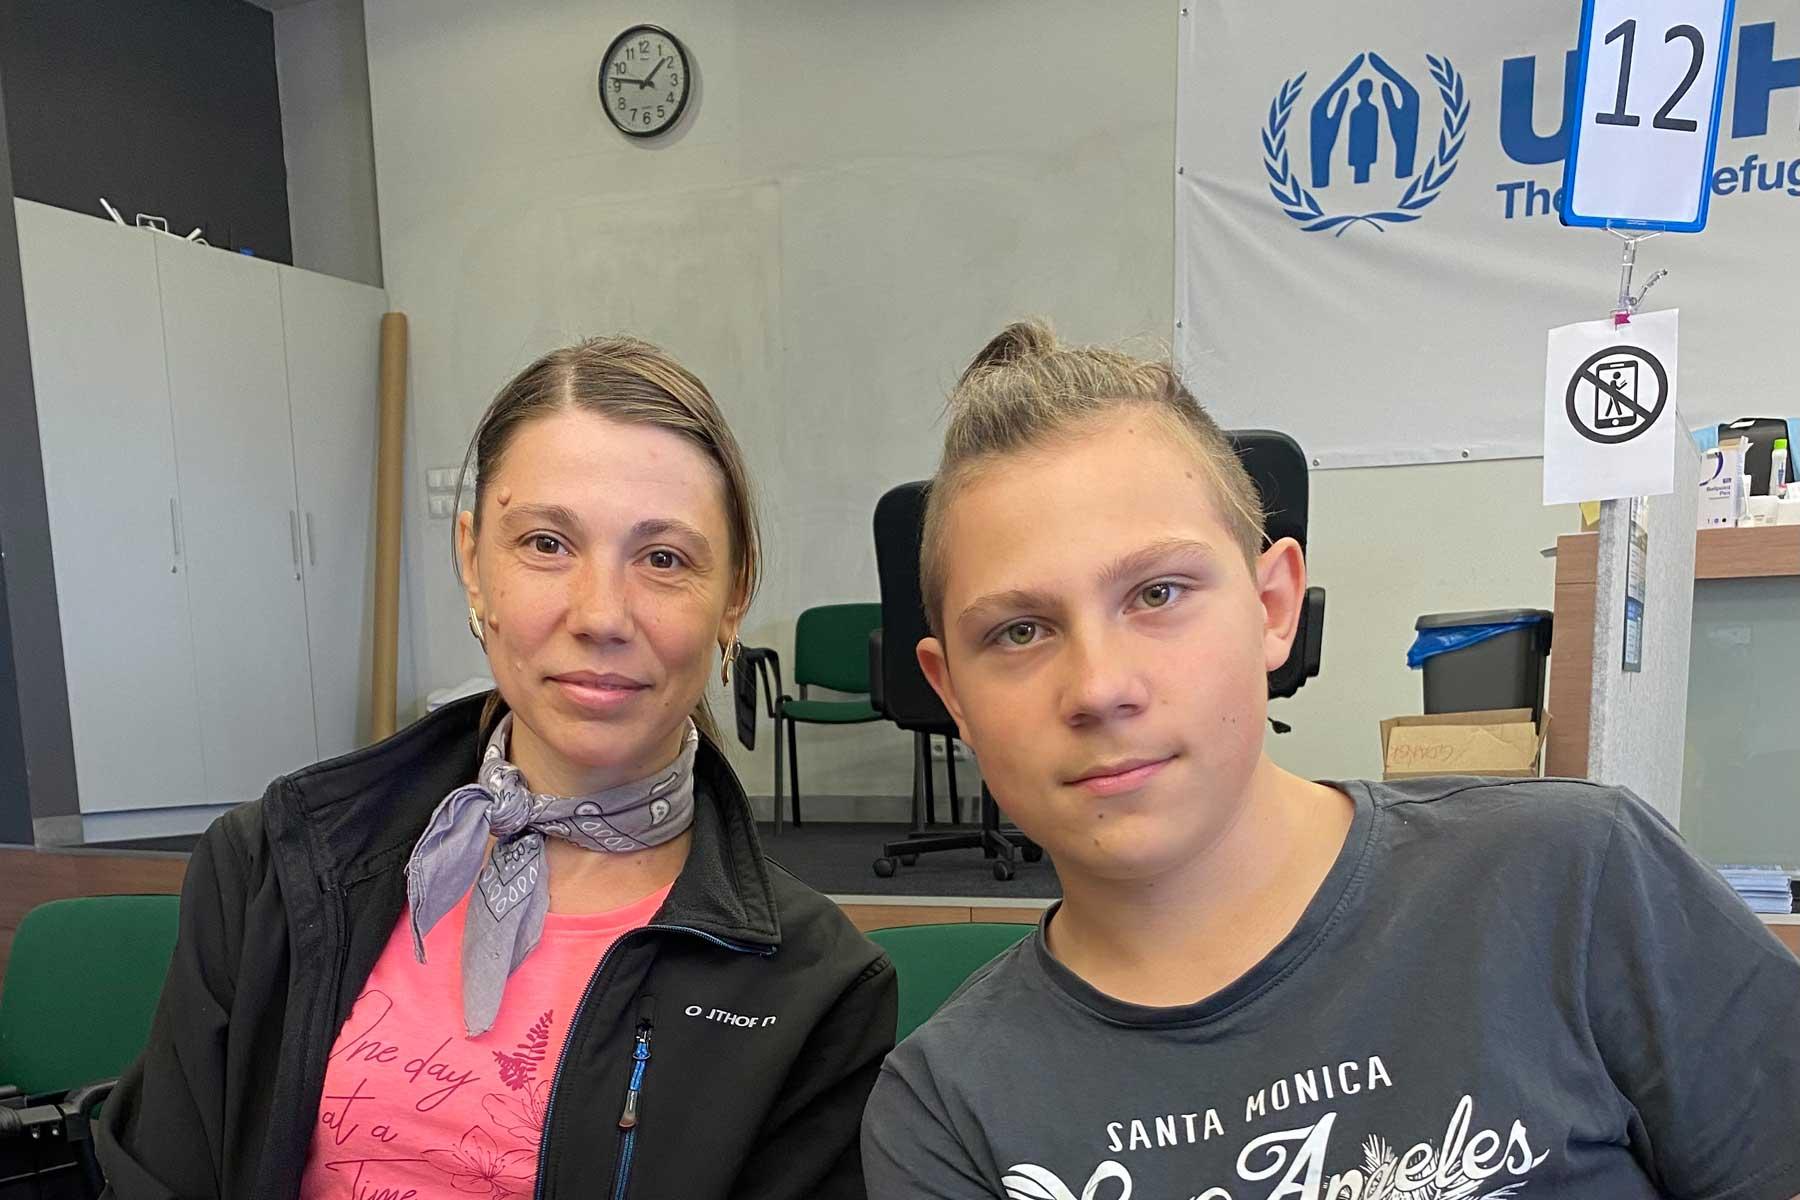 Dina with one of her sons. To support her children, she took a job below her qualifications. Photo: B. PACHUTA, LWF